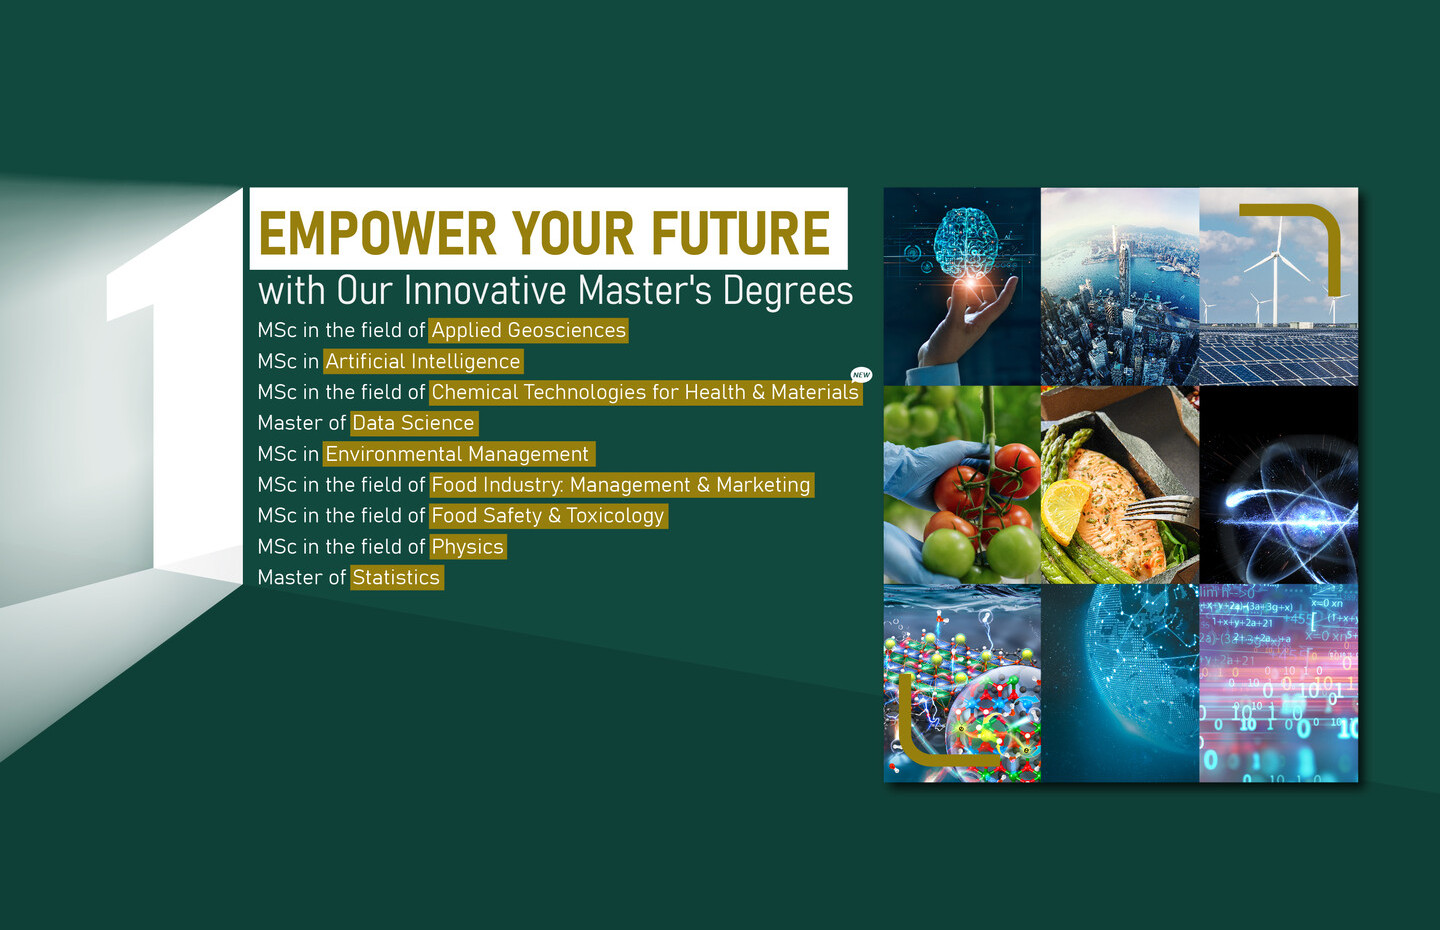 Empower Your Future with Our Innovative Master's Degrees